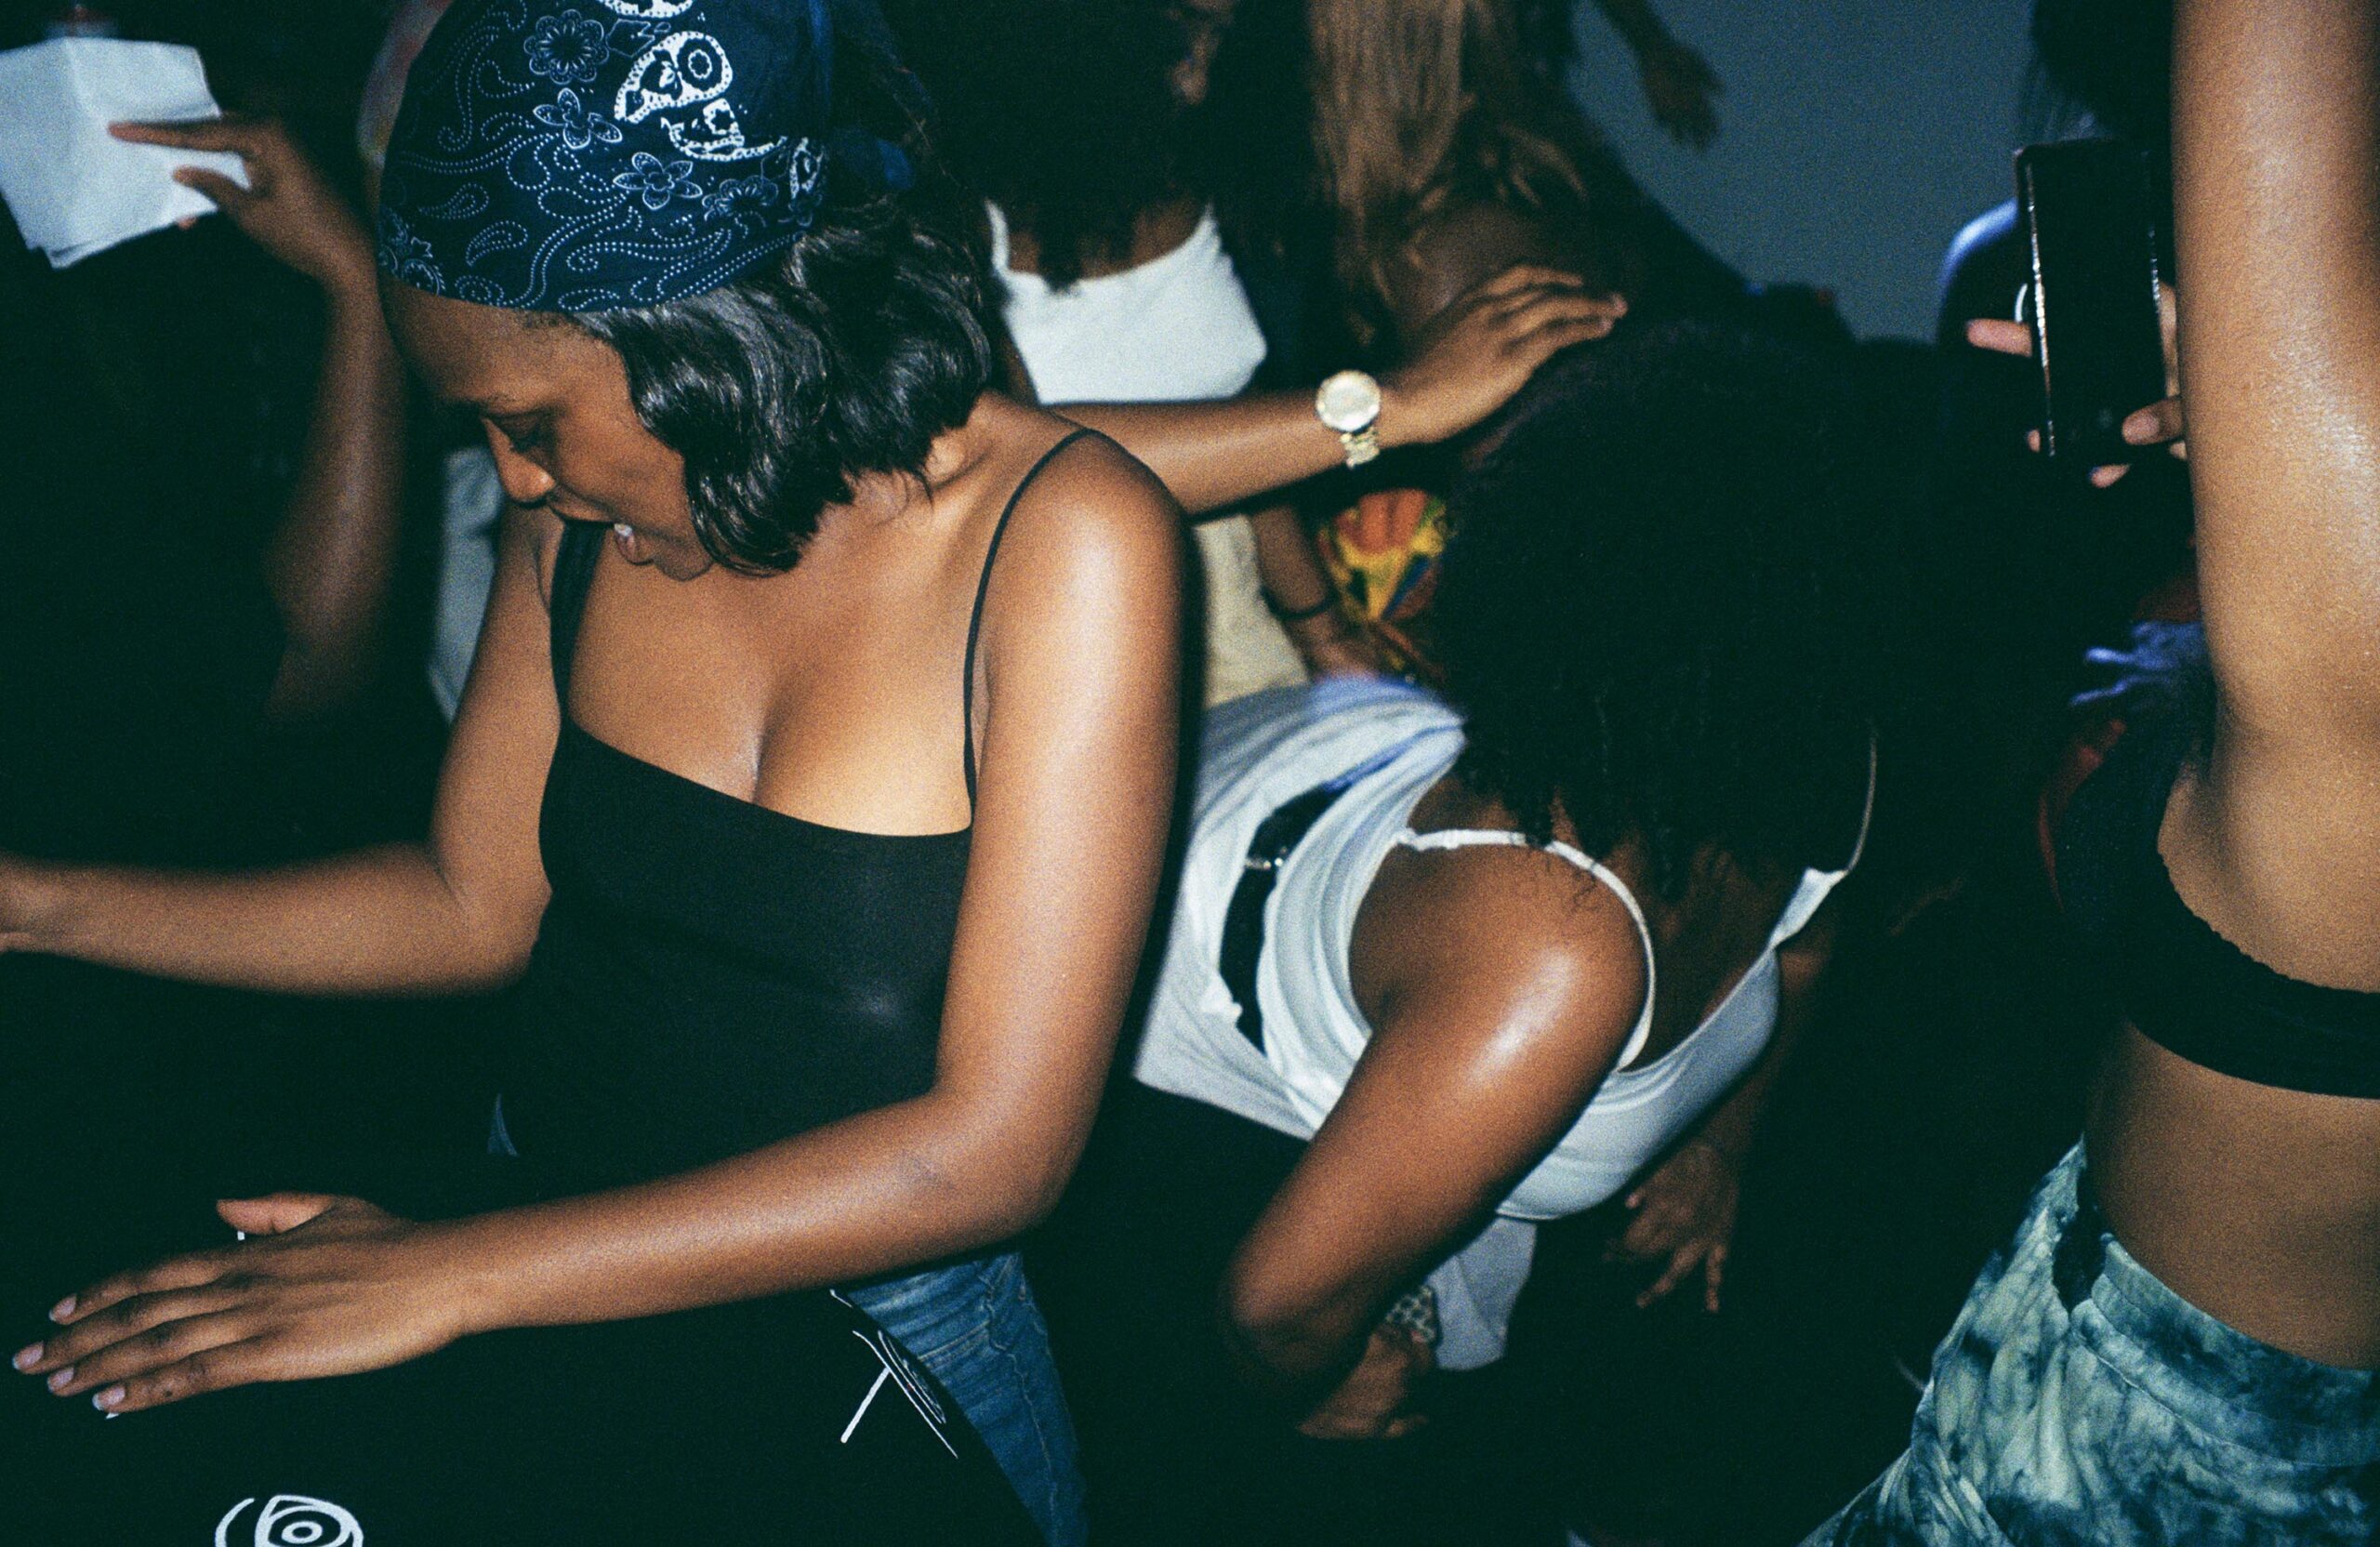 Photos that take you back to dancefloor memories with friends